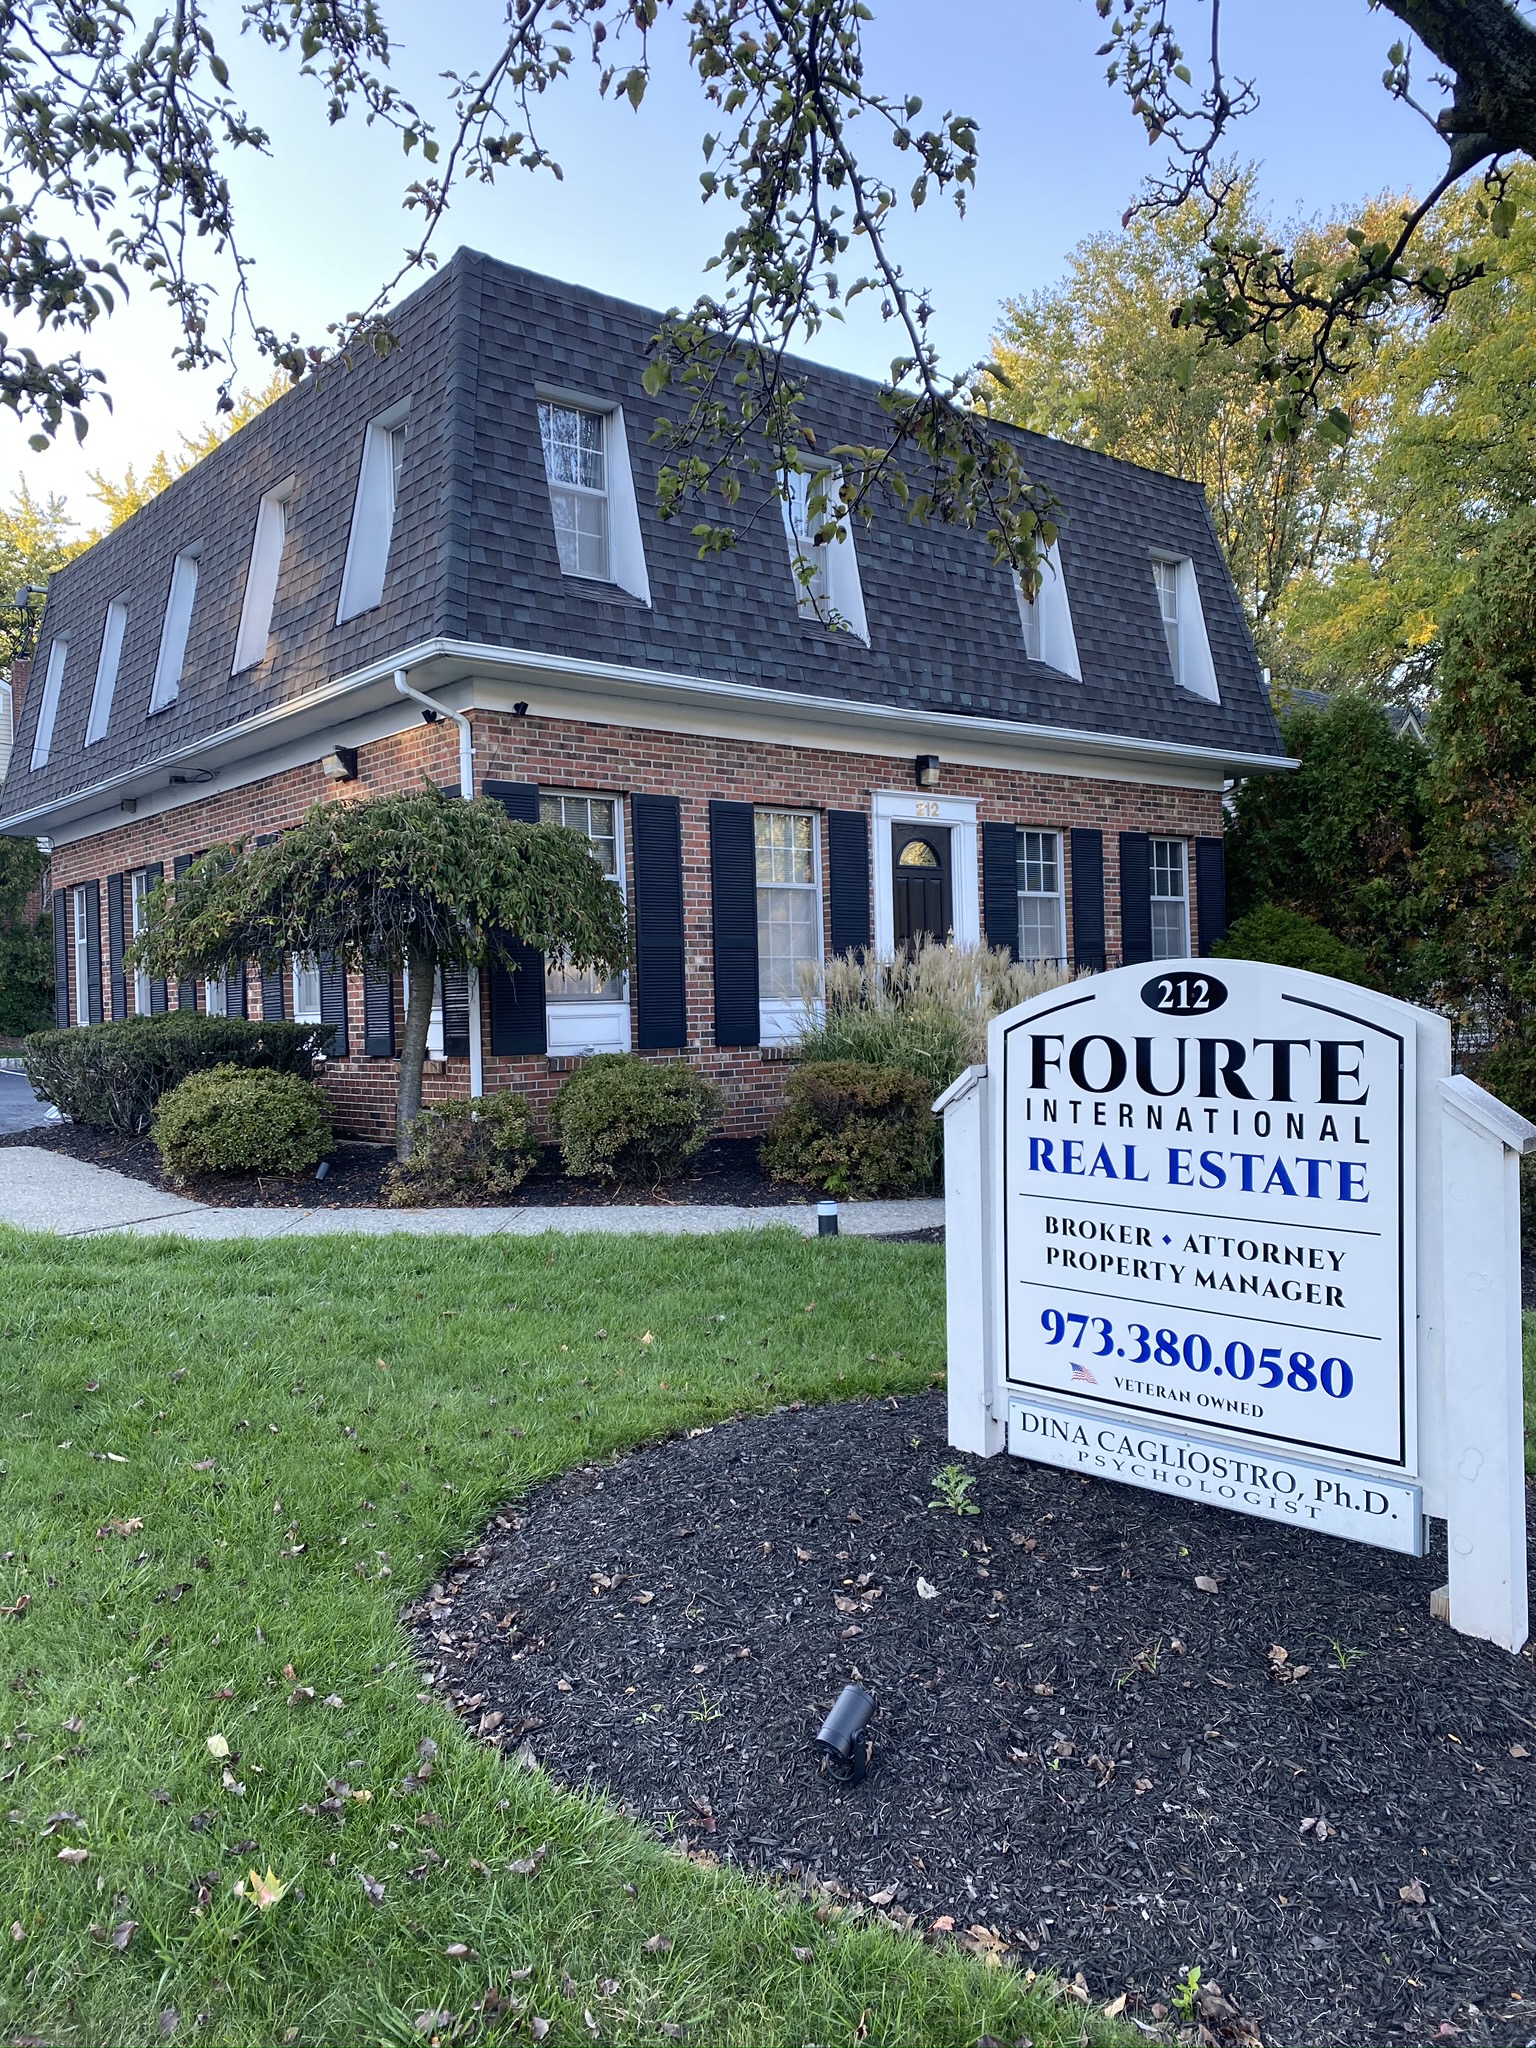 Fourte International Real Estate's Headquarters building in Essex County New Jersey with a sign on the front lawn advertising broker, attorney and property manager services